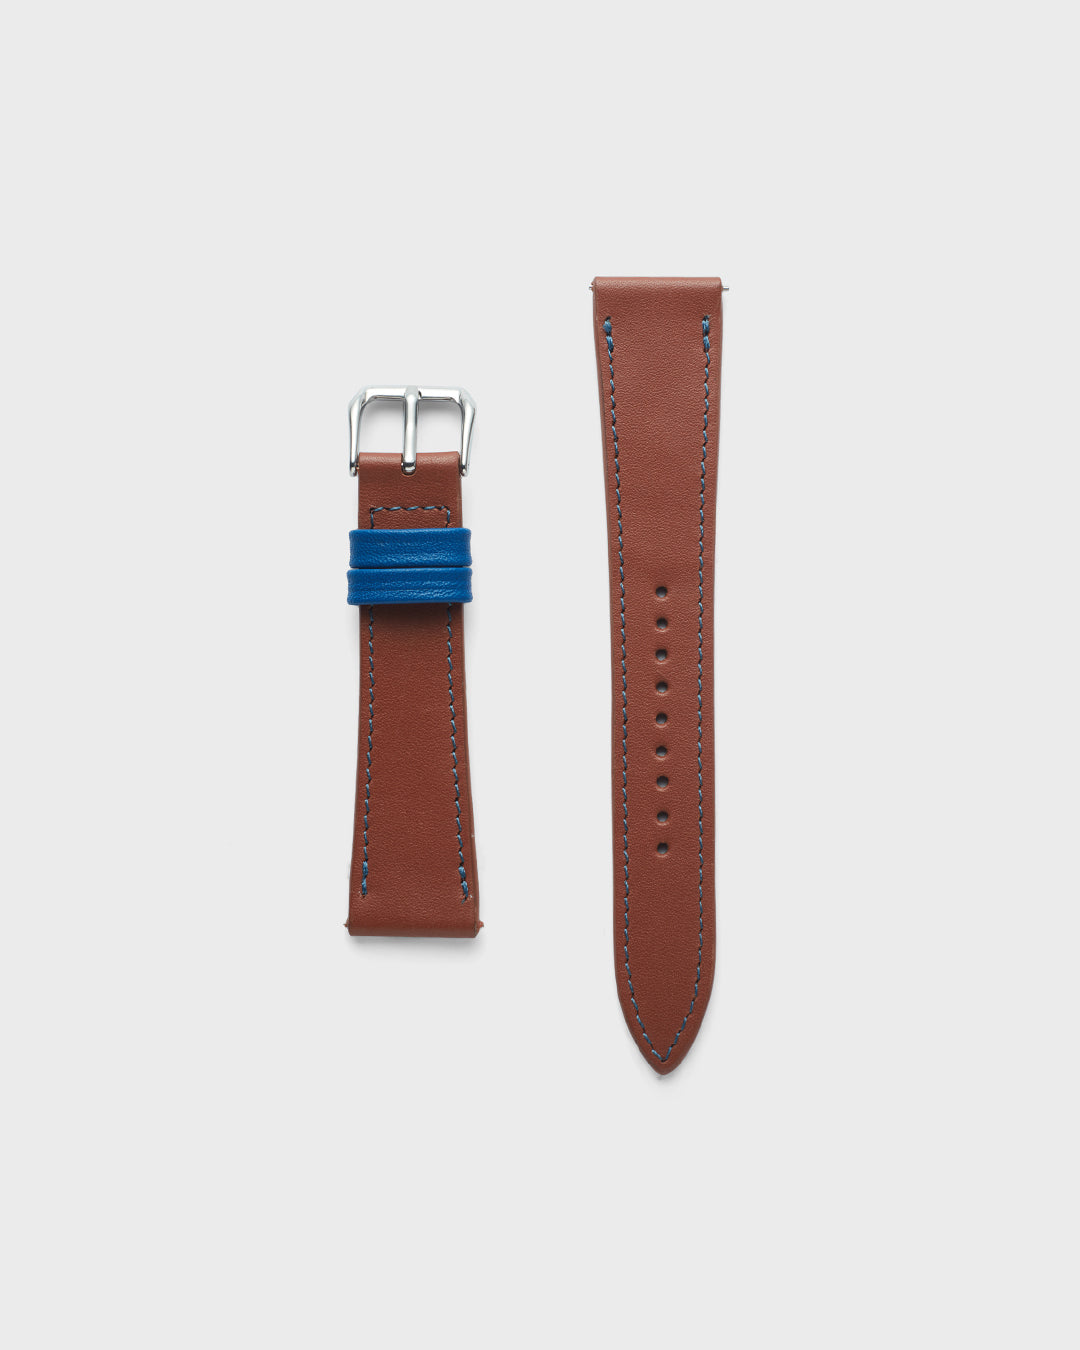 INTRO STRAP - FOR QUARTZ, MECHANICAL & SMART WATCHES [Parade Stitch in Fine Indian Leather] My Store